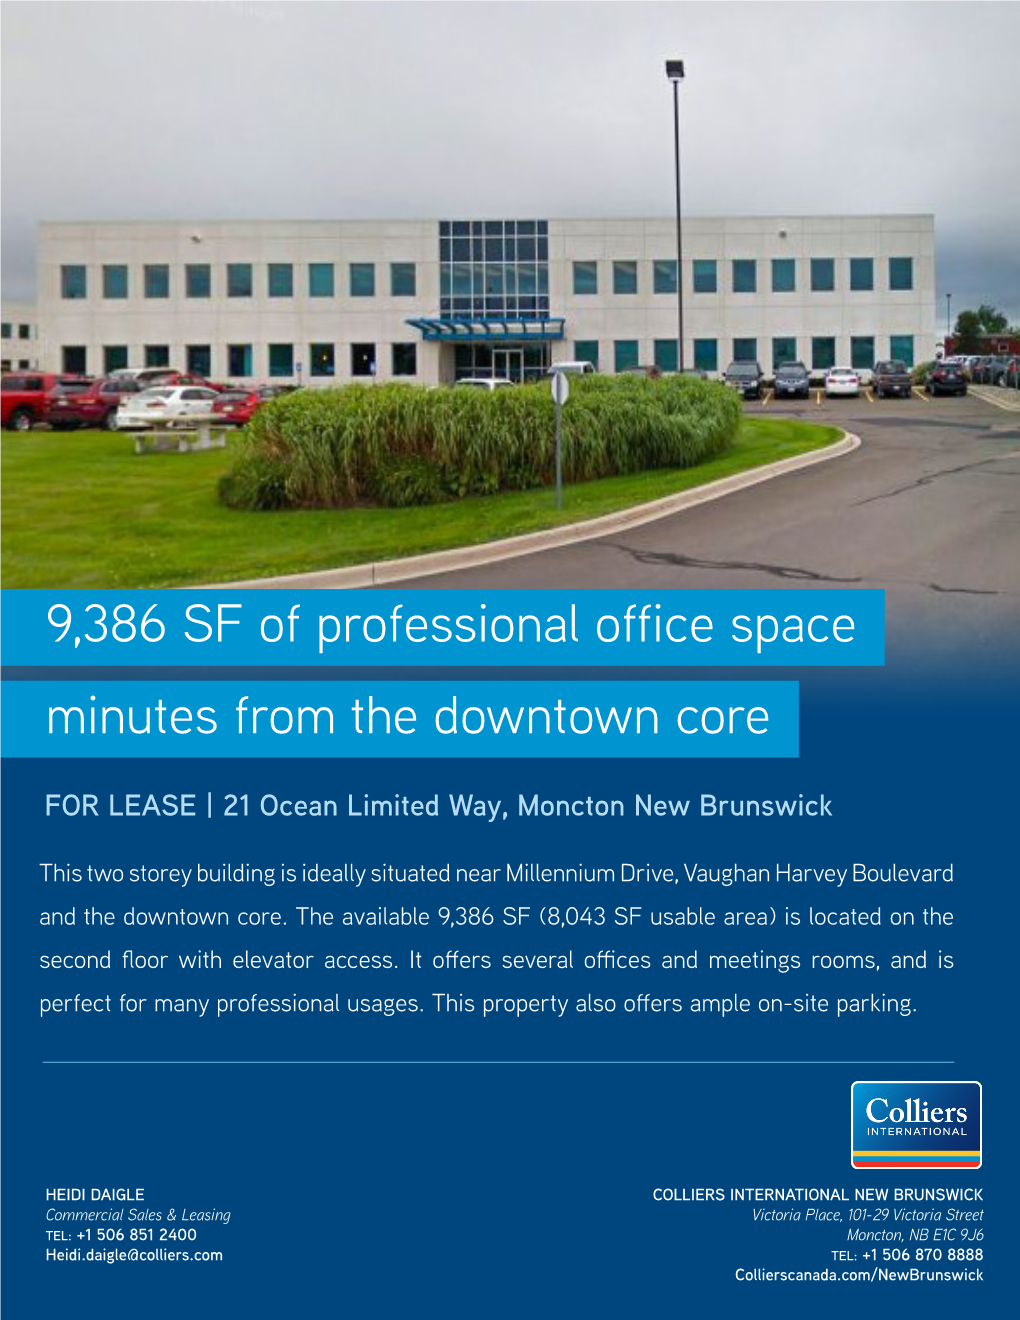 FOR LEASE | 21 Ocean Limited Way, Moncton New Brunswick